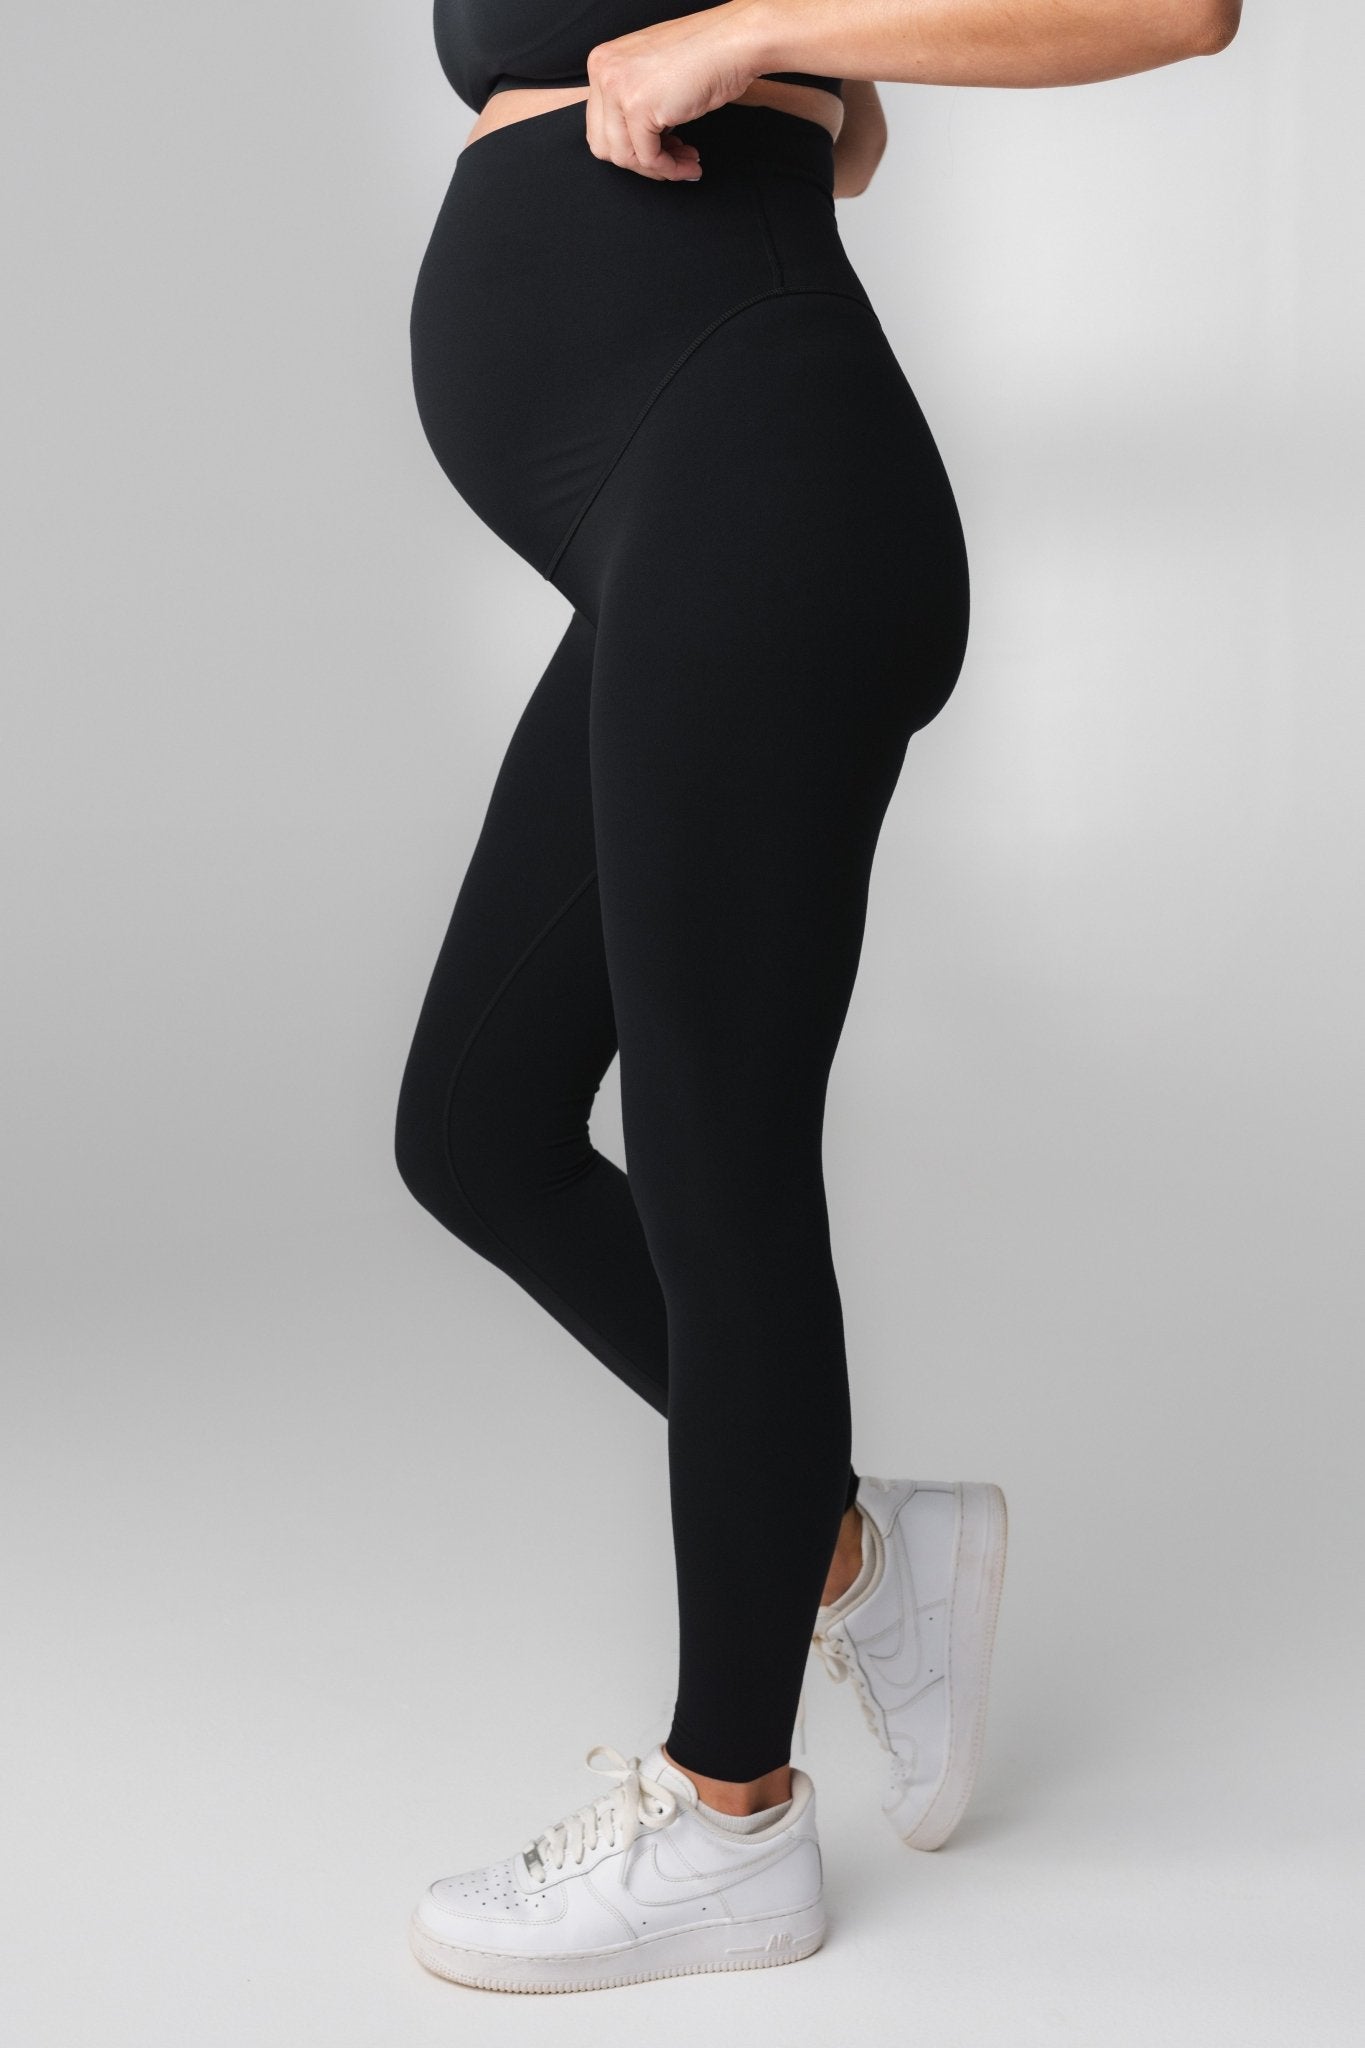 Buy Enerful Women's Maternity Workout Leggings Over The Belly Pregnancy  Active Wear Athletic Yoga Pants with Pockets, Black, Small at Amazon.in